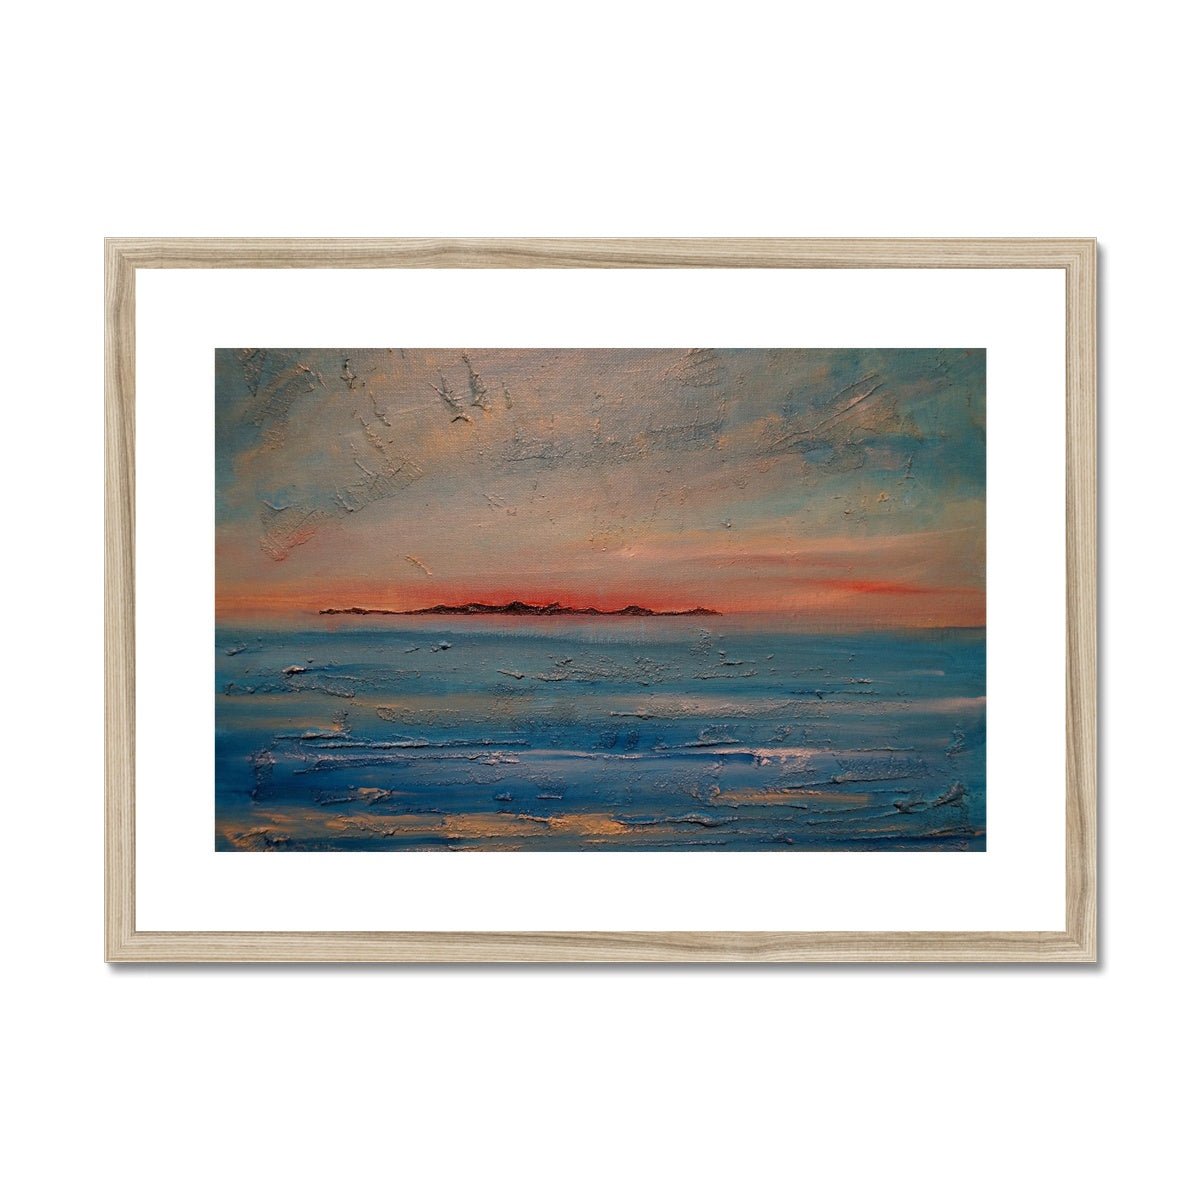 Gigha Sunset Painting | Framed & Mounted Prints From Scotland-Framed & Mounted Prints-Hebridean Islands Art Gallery-A2 Landscape-Natural Frame-Paintings, Prints, Homeware, Art Gifts From Scotland By Scottish Artist Kevin Hunter